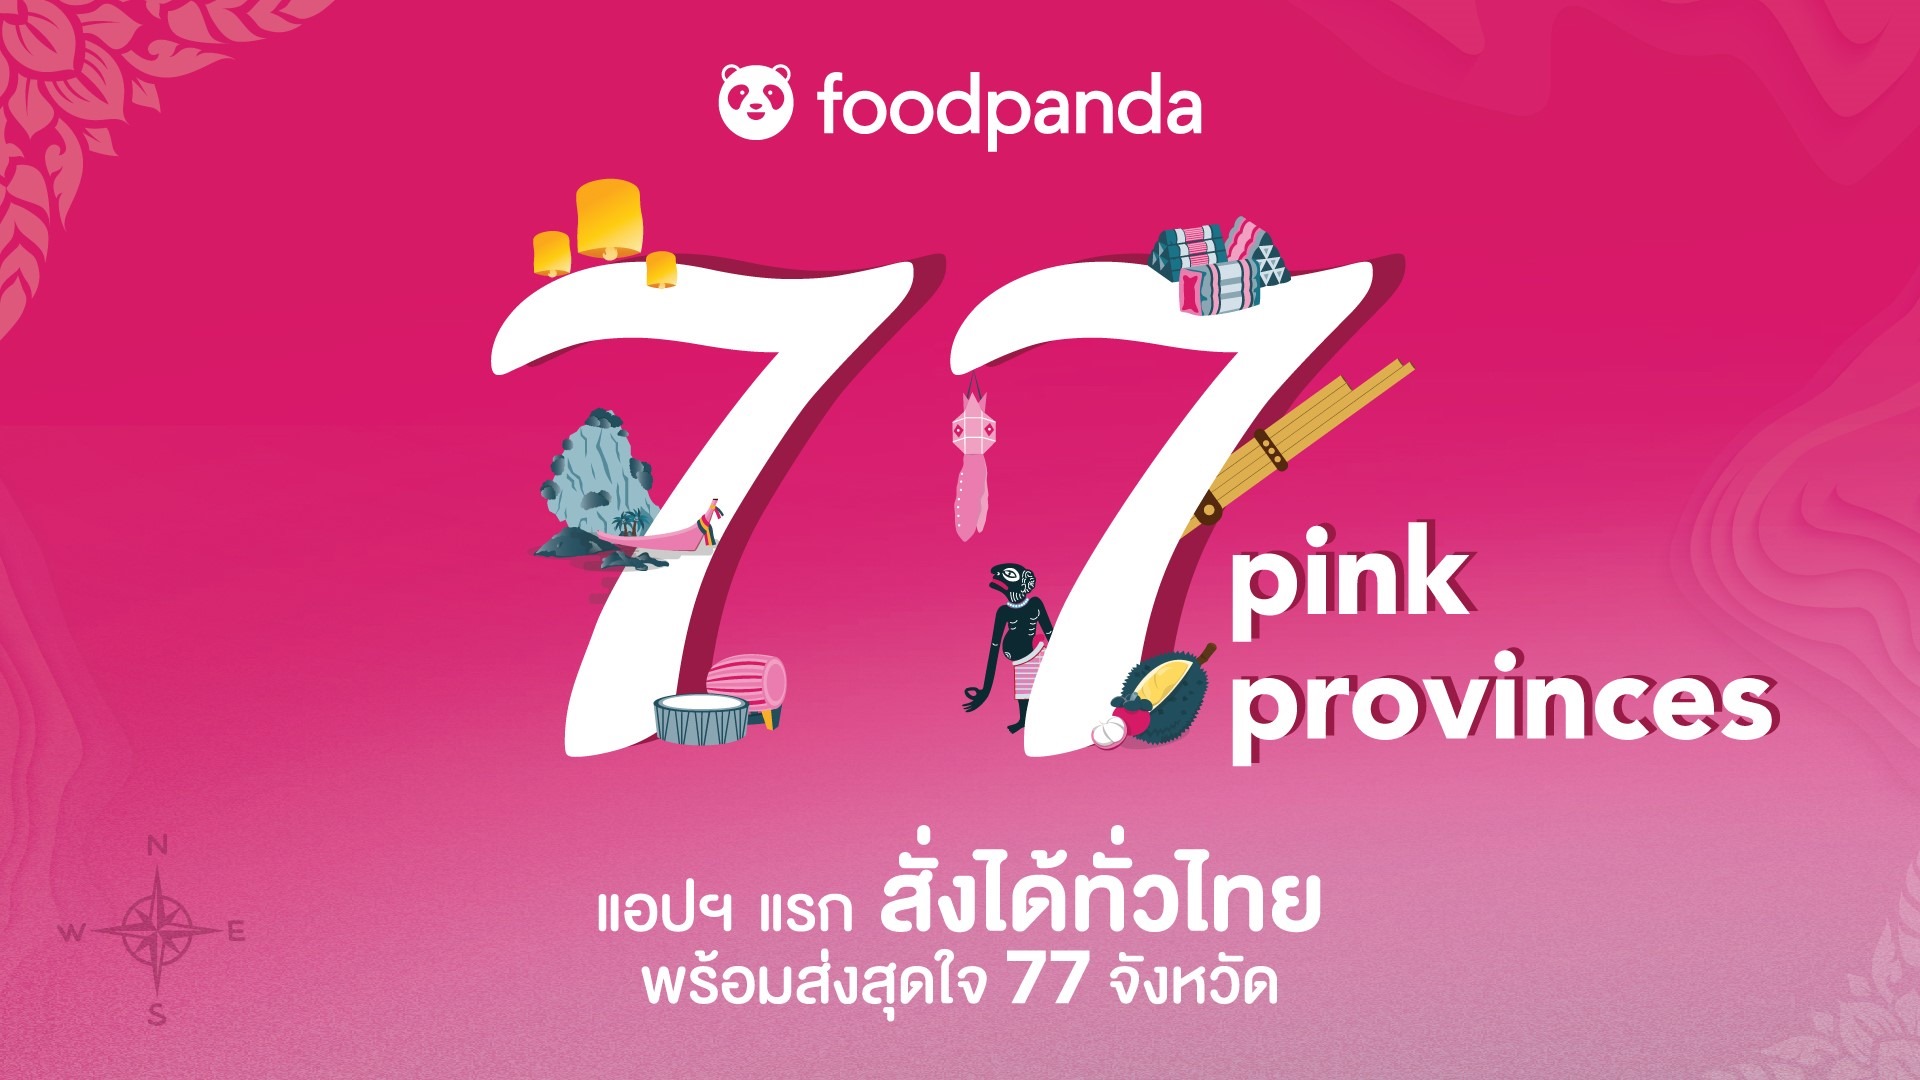 foodpanda announces nationwide coverage in Thailand —  the first food delivery platform to operate across all 77 provinces